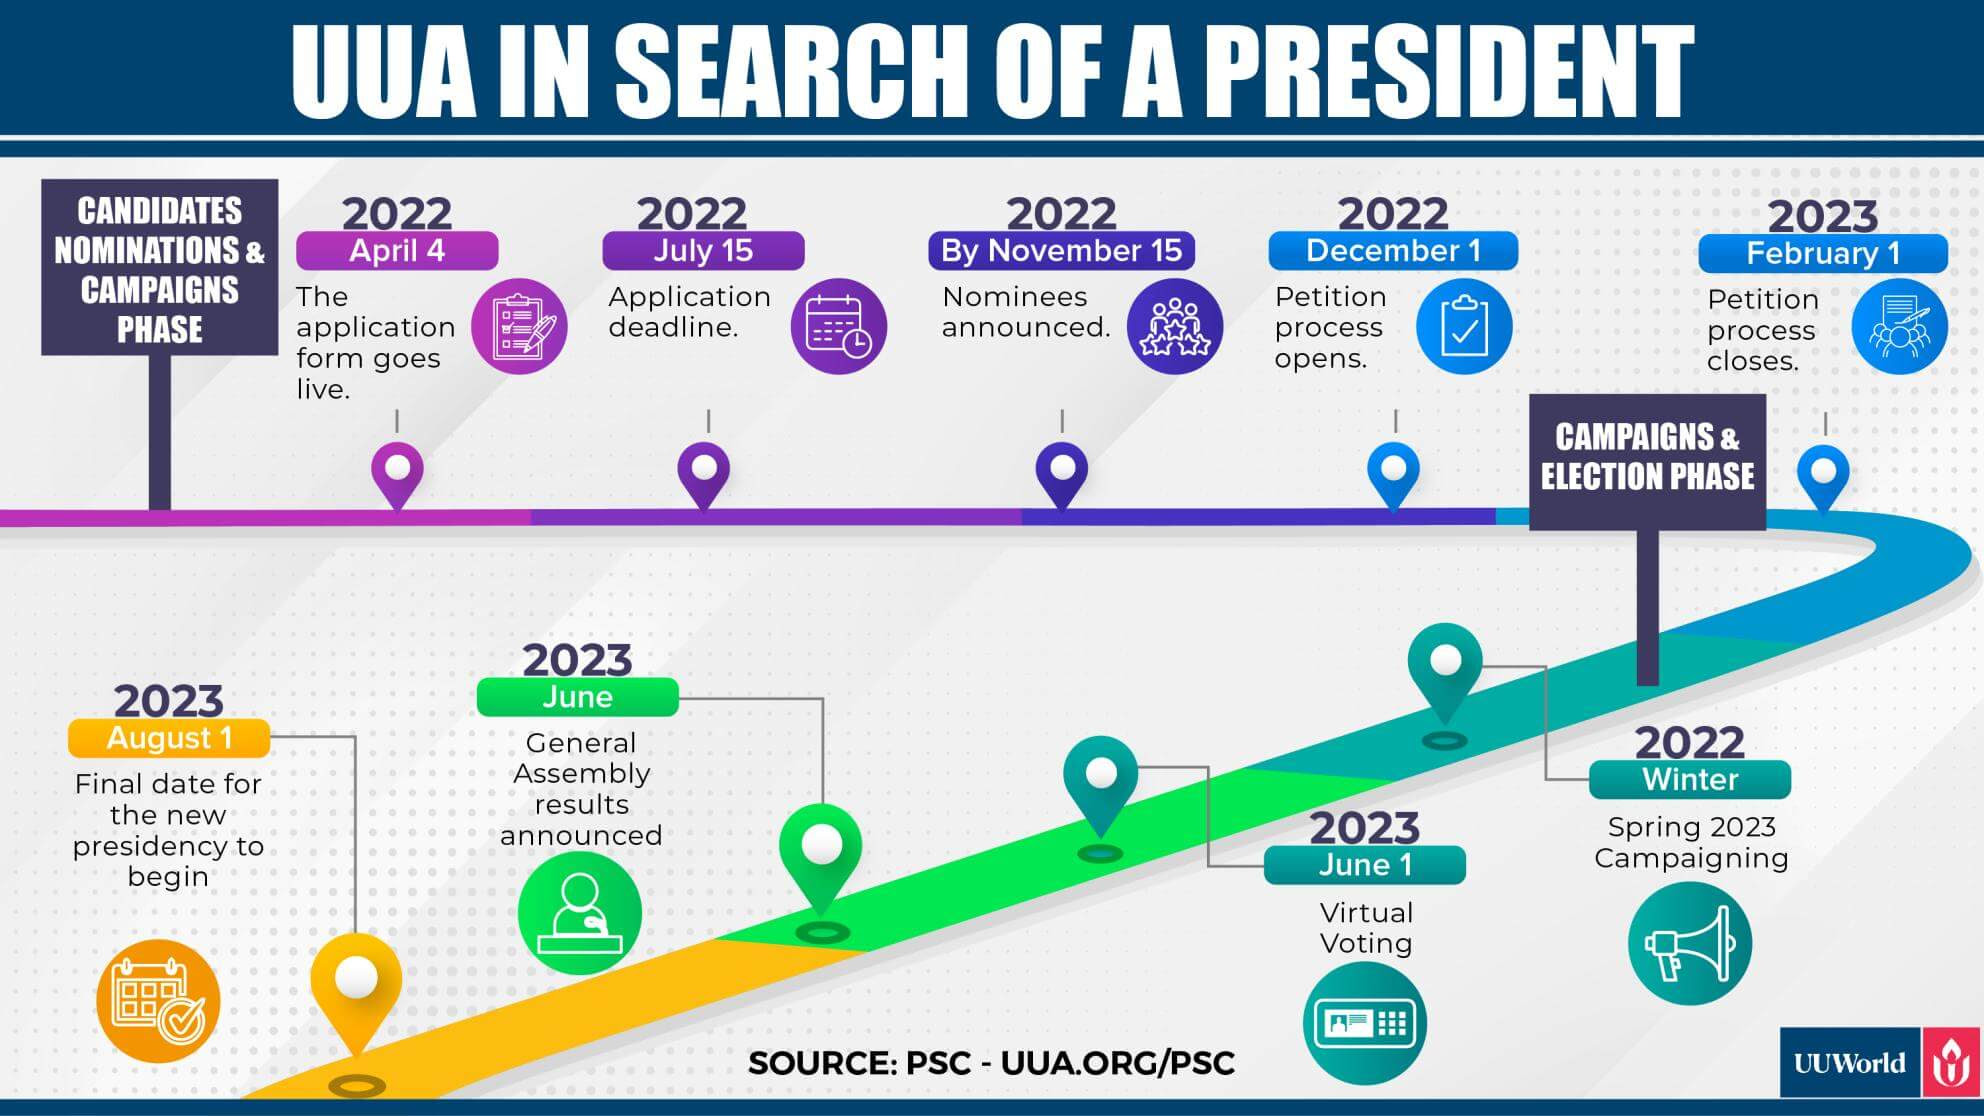 infographic_uua president search